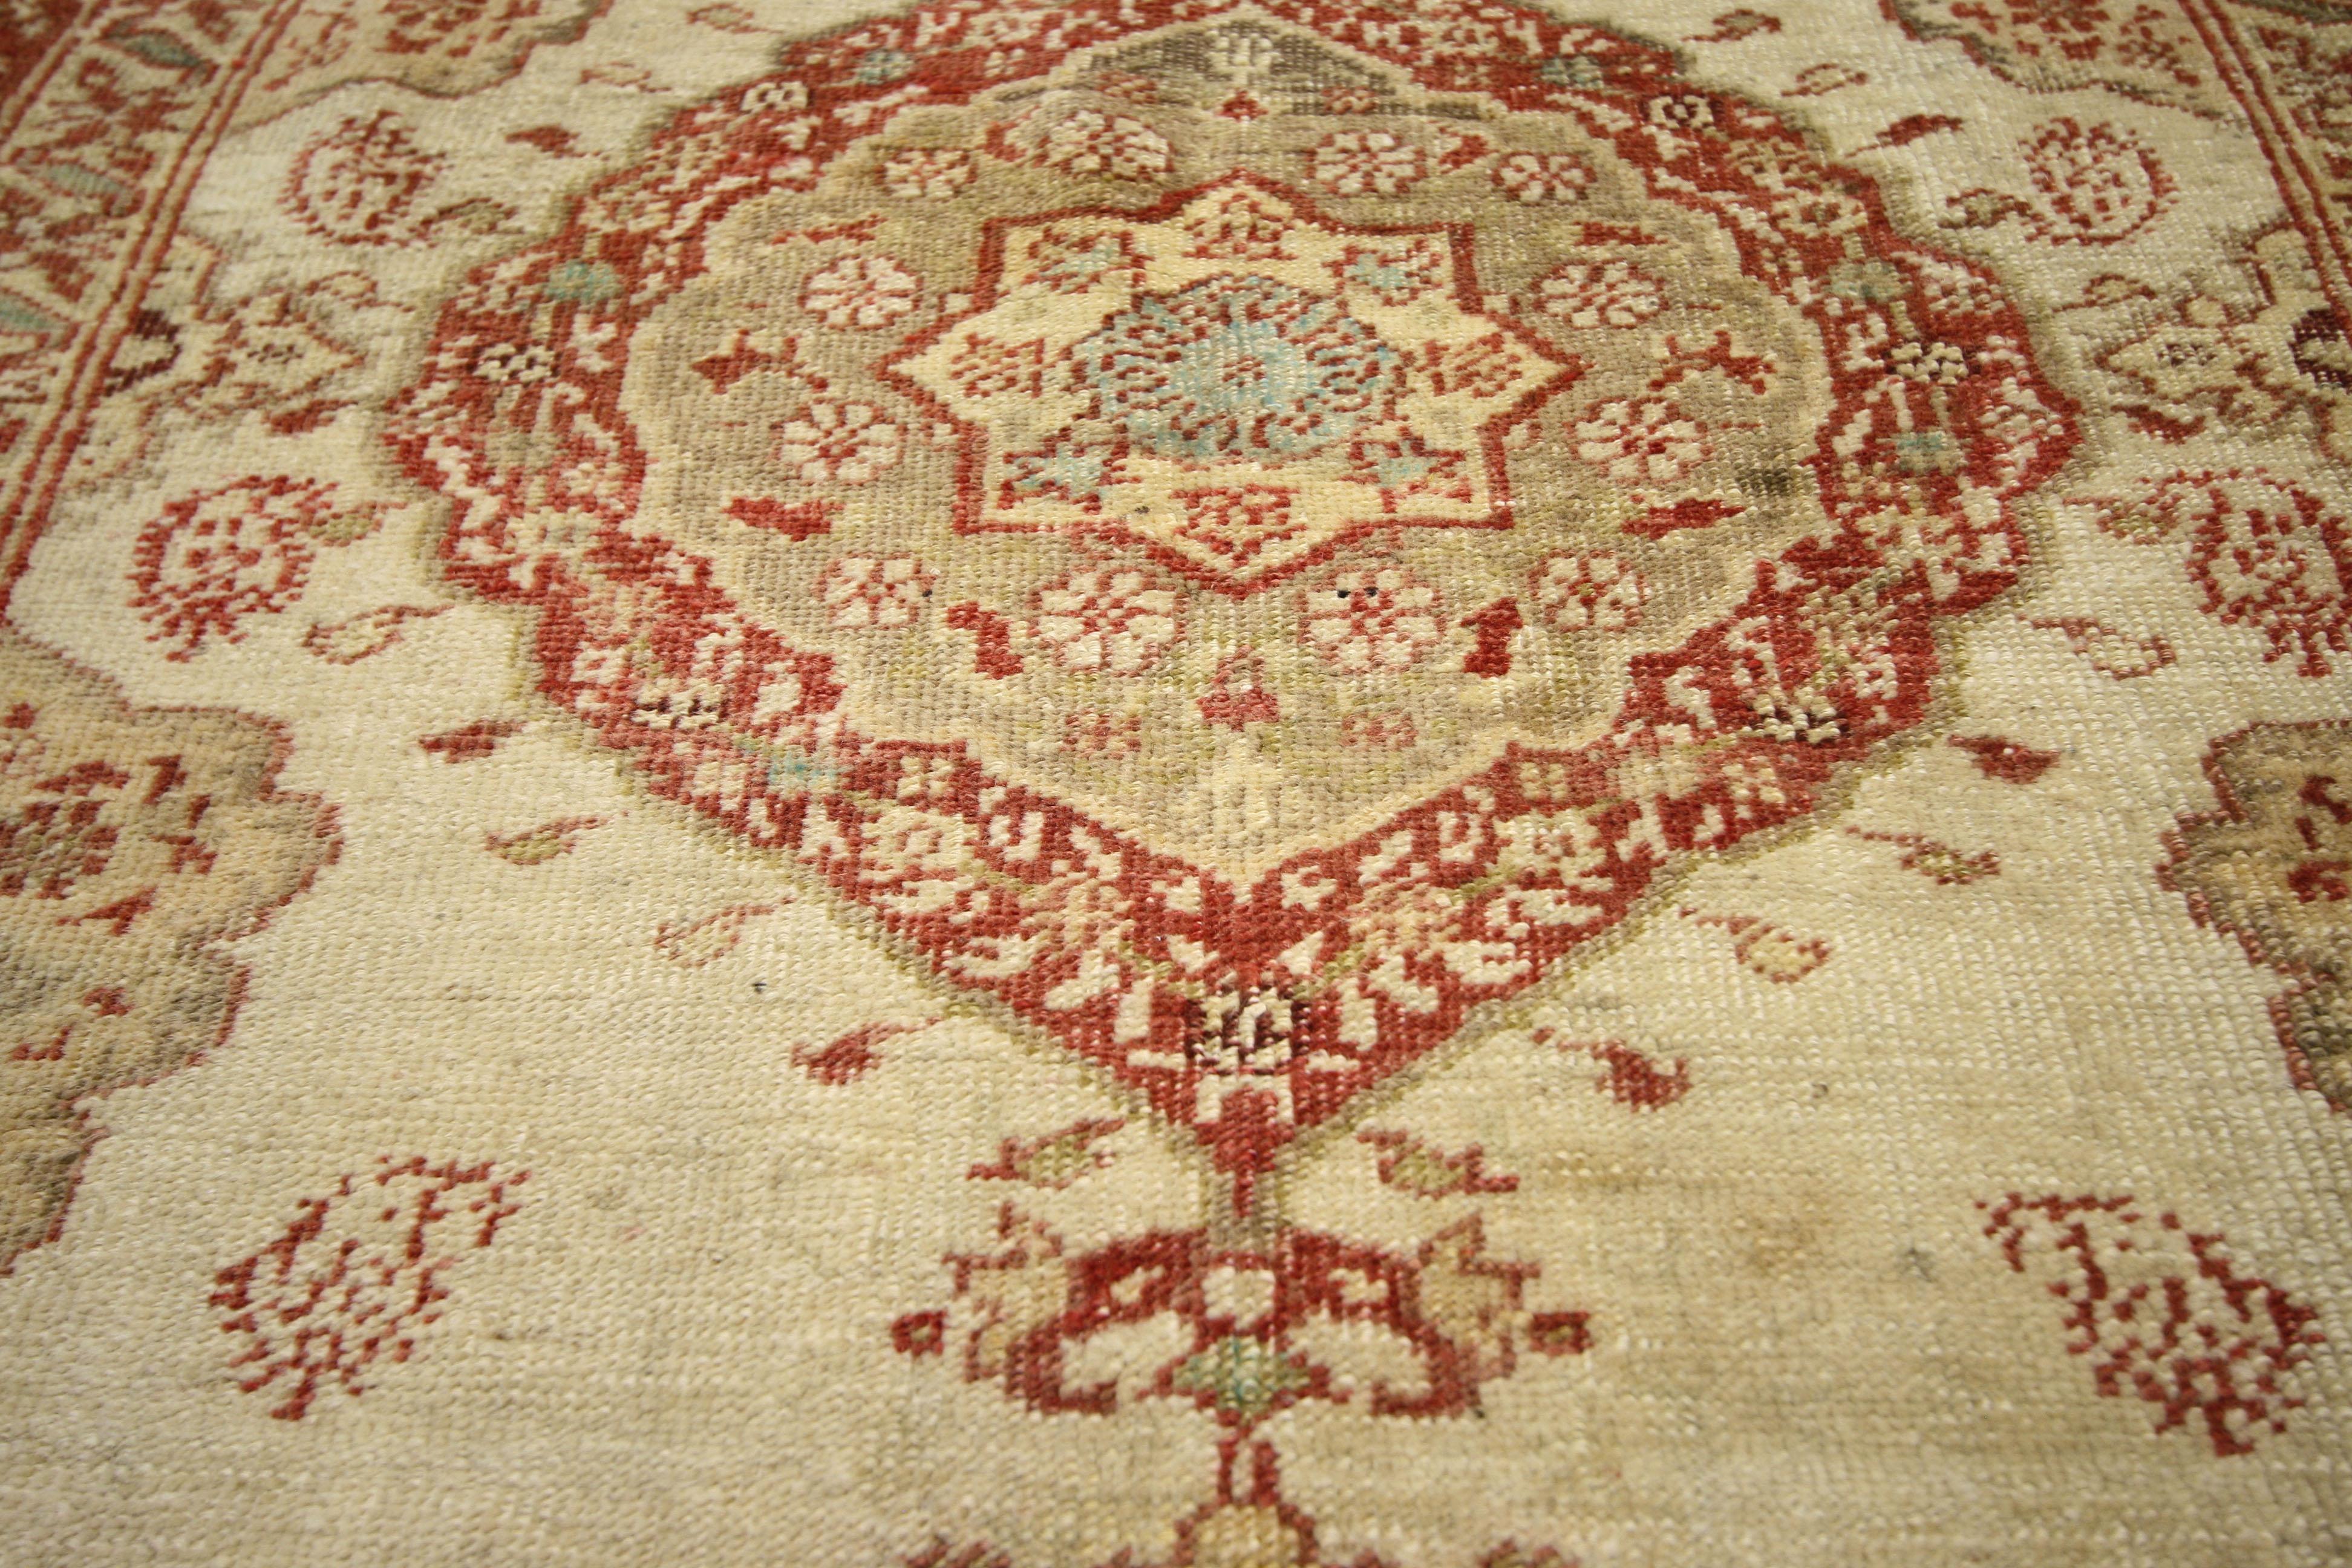 52325, vintage Turkish Oushak rug with French Rococo style. French Rococo refinement marry Turkish weaving excellence in this beautiful hand knotted wool vintage Oushak rug. A lobed and pointed medallion sets the stage for a plethora of boteh and